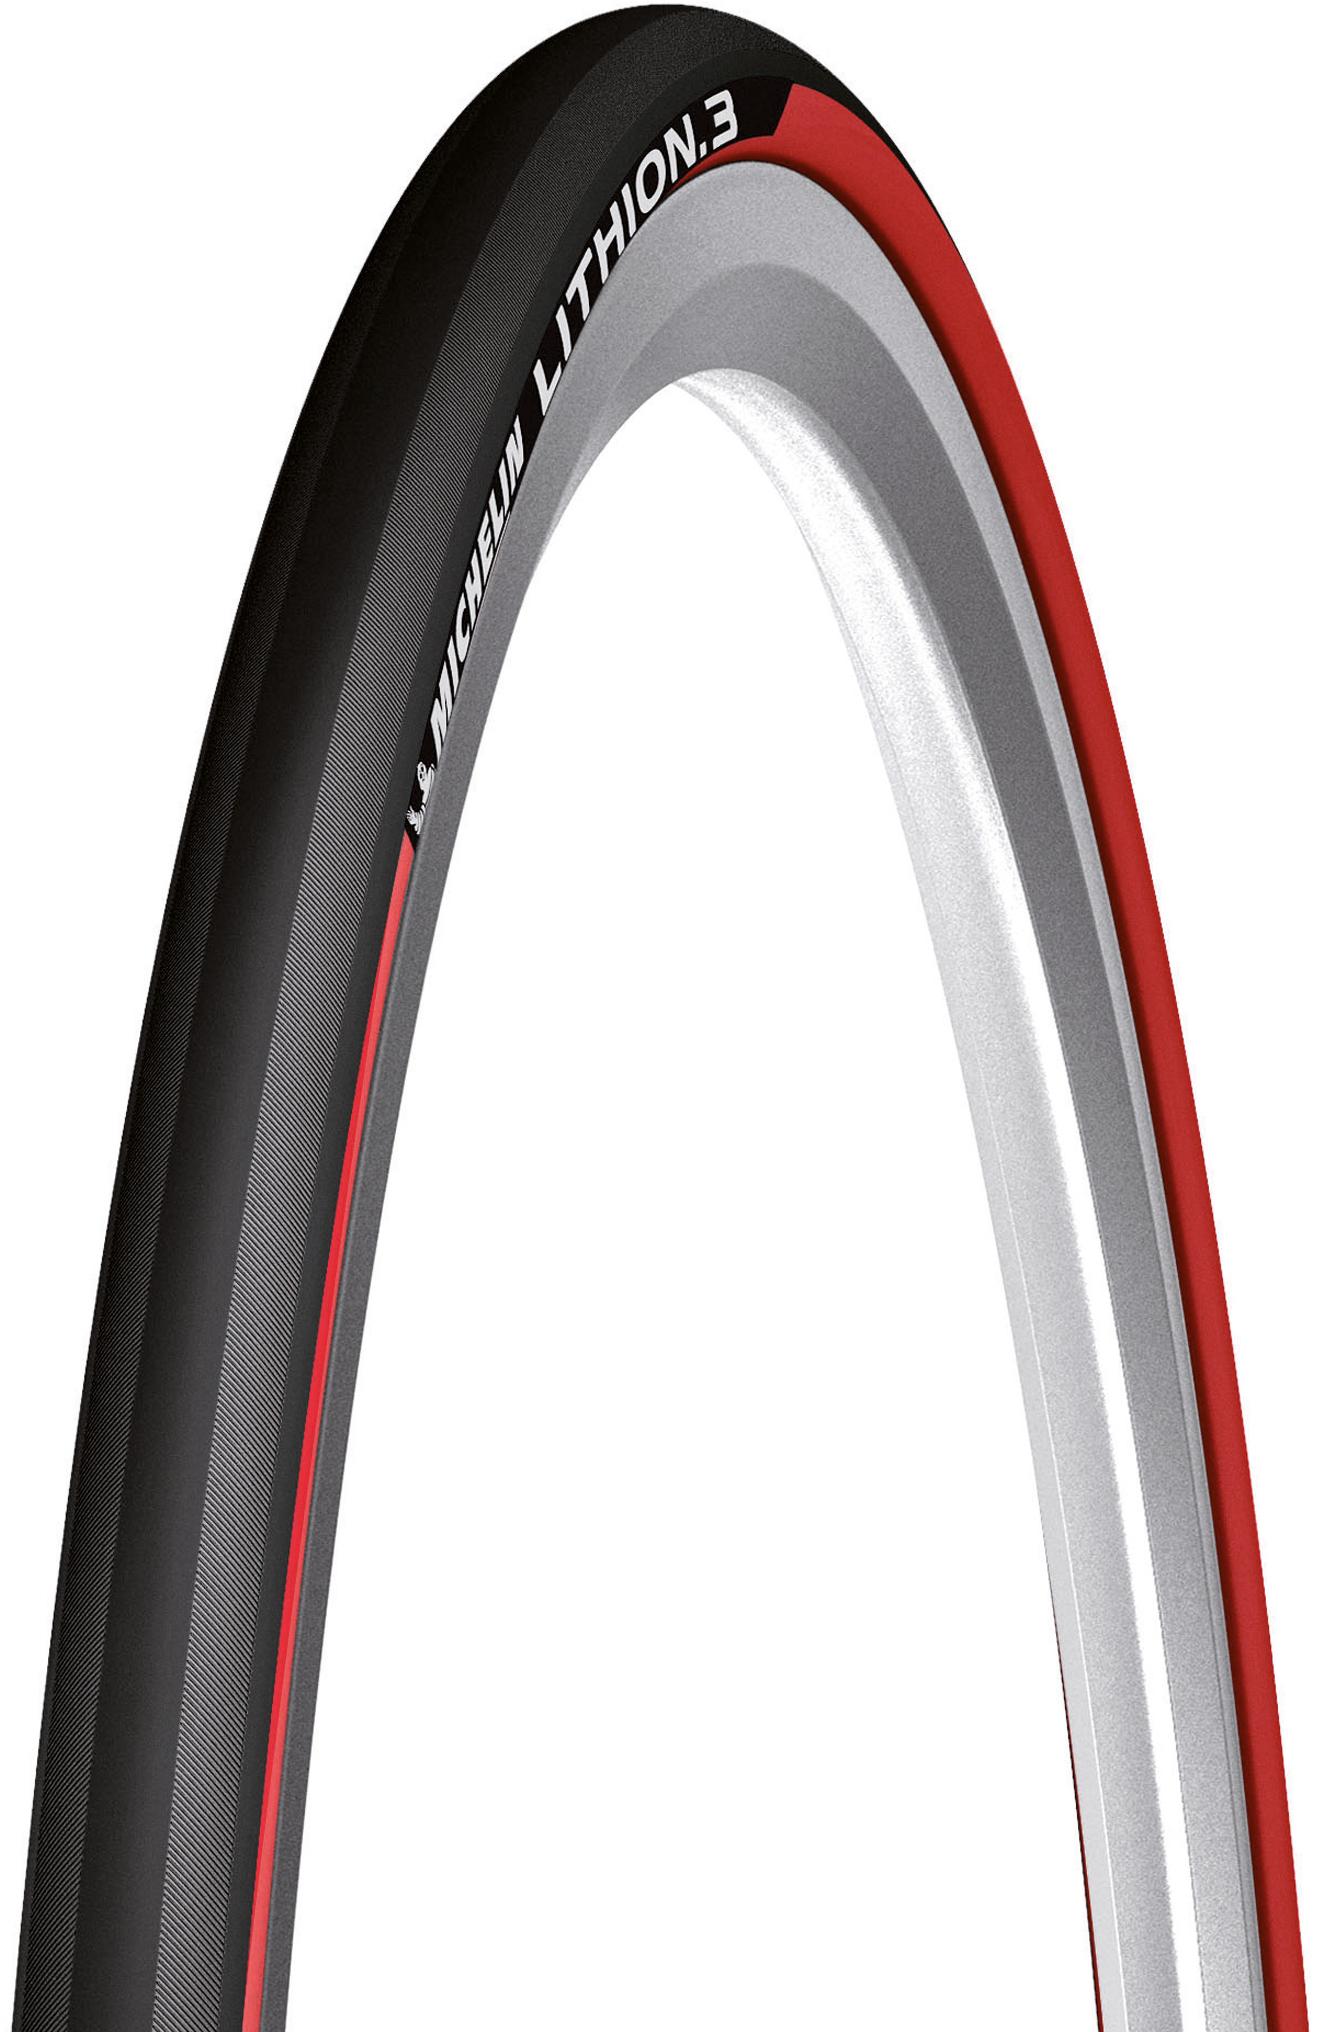 Michelin Lithion 3 Folding Road Tyre - Black/red